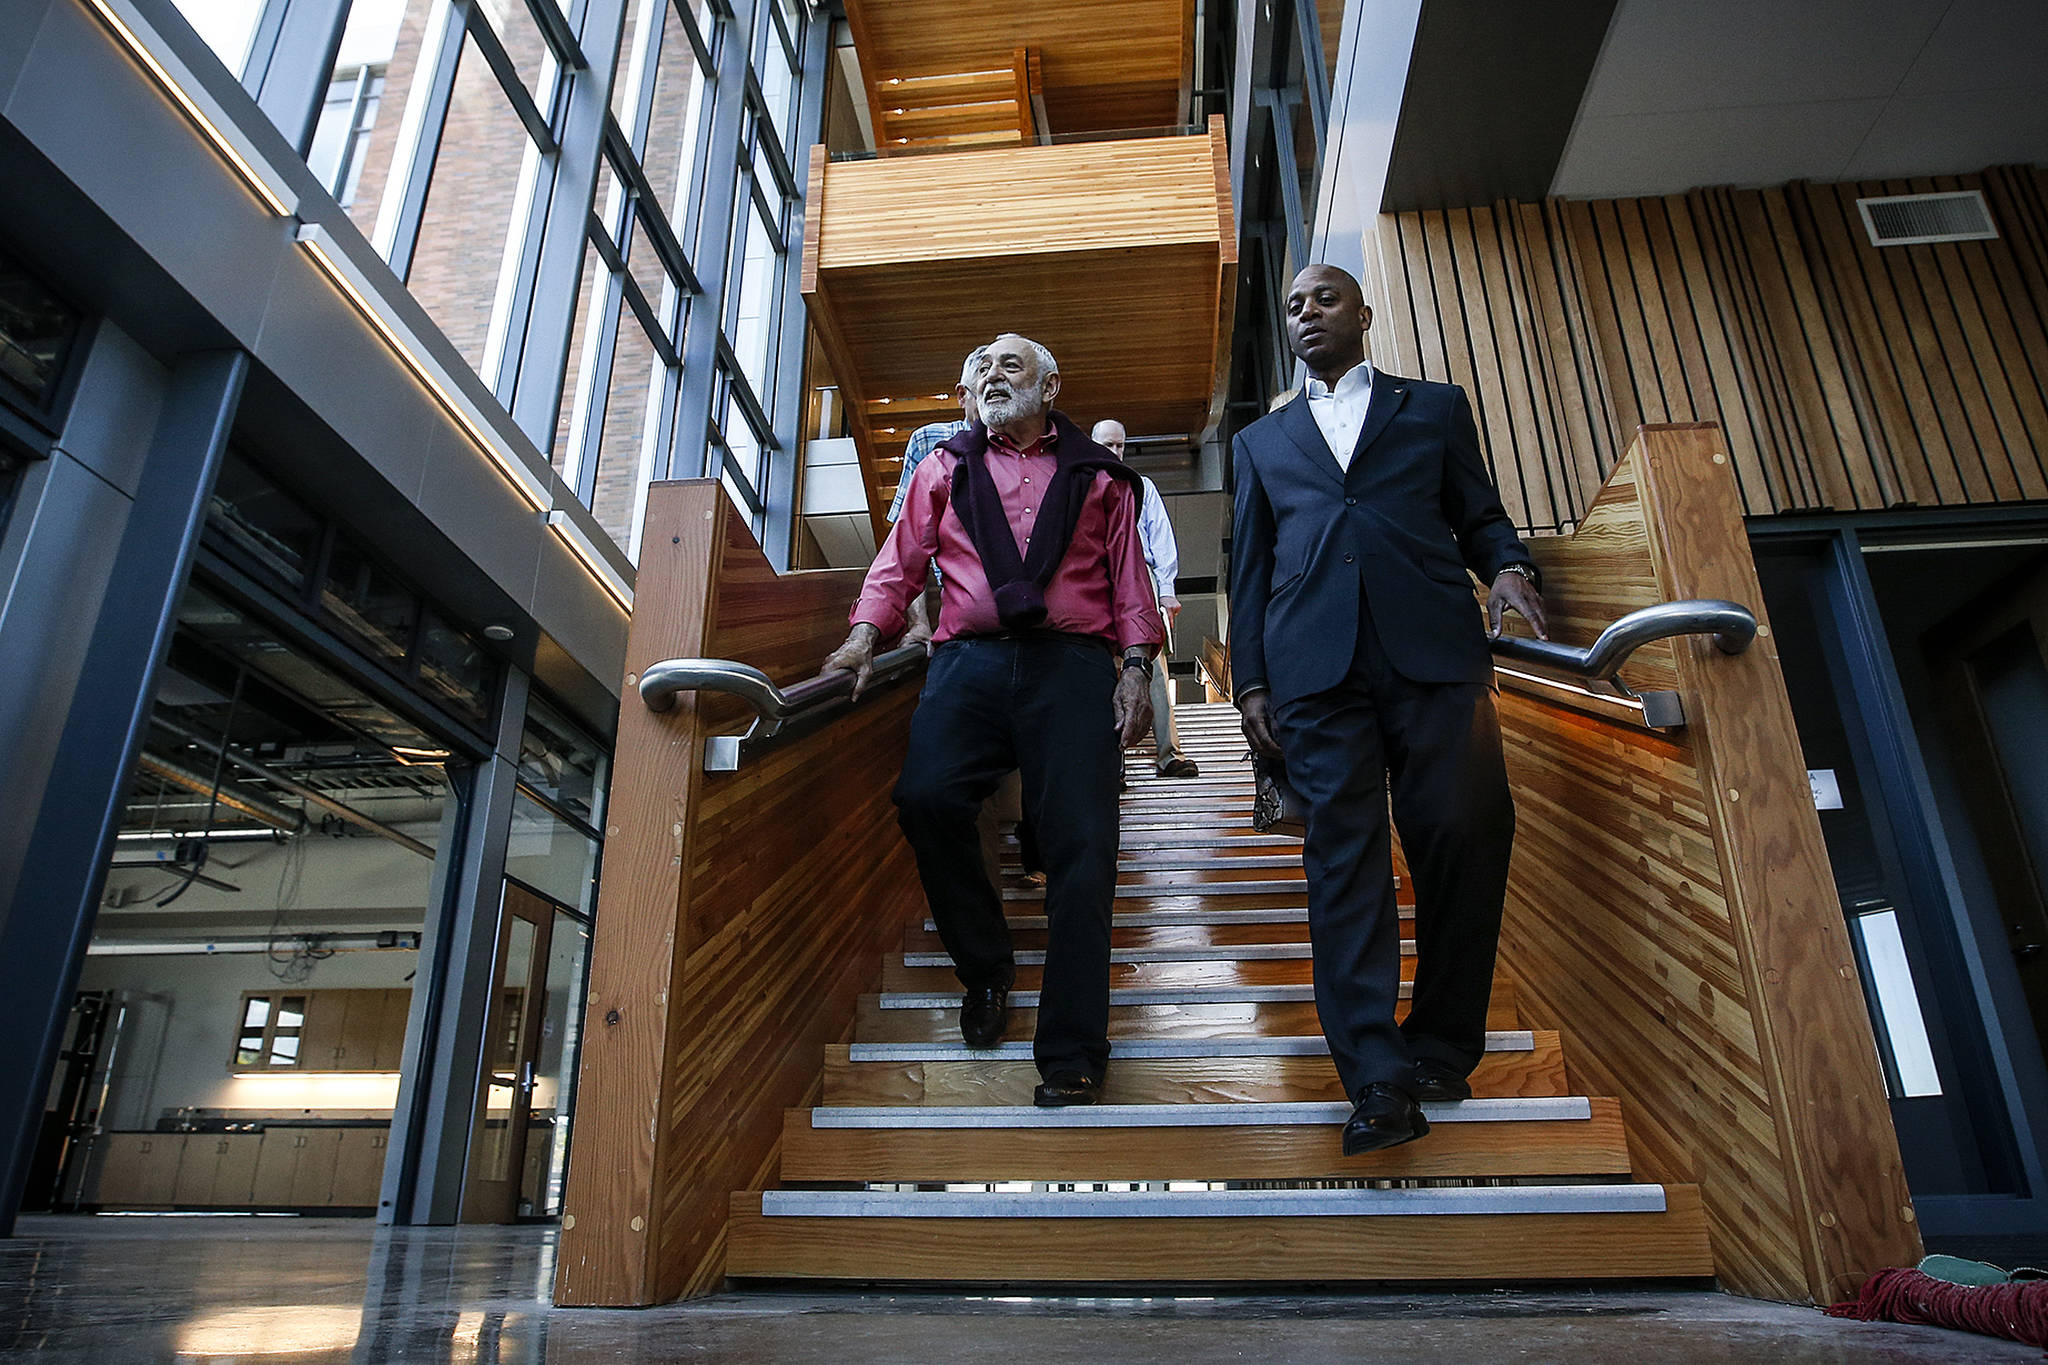 Dr. Larry Schecter (left), associate dean for WSU North Puget Sound’s medical education programs, walks down the central staircase with Chancellor Paul Pitre at Washington State University Everett. The campus, which opened in 2017, will attract youth and talent to Everett and Snohomish County. (Ian Terry / The Herald)